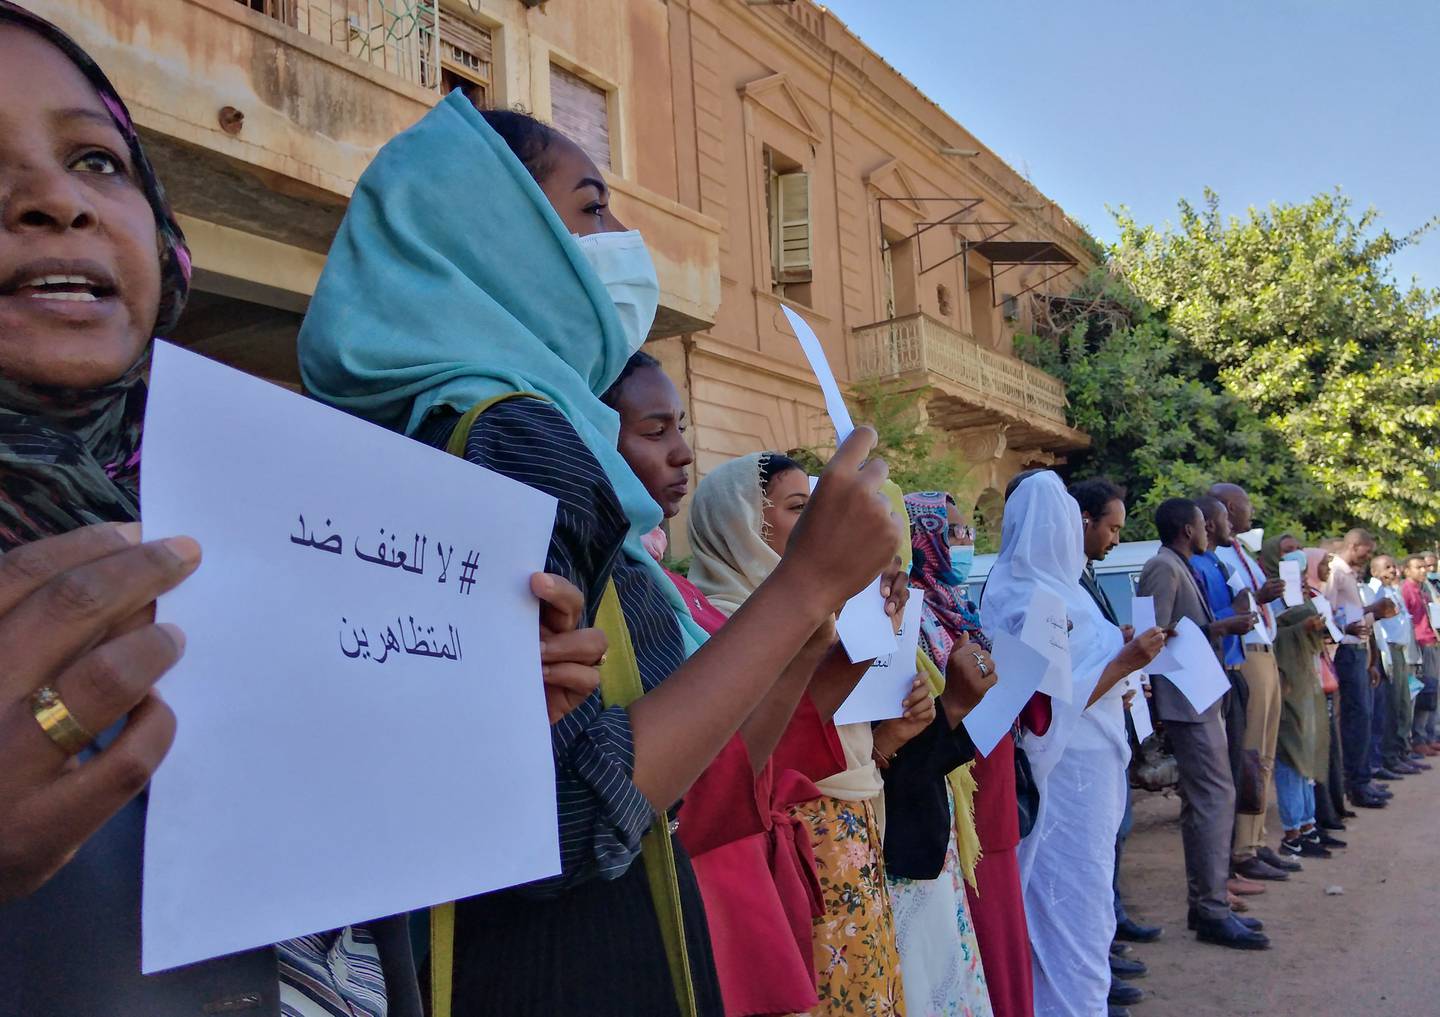 Sudanese lawyers brandish signs demanding accountability for perpetrators of violence against protesters, in the capital Khartoum. AFP